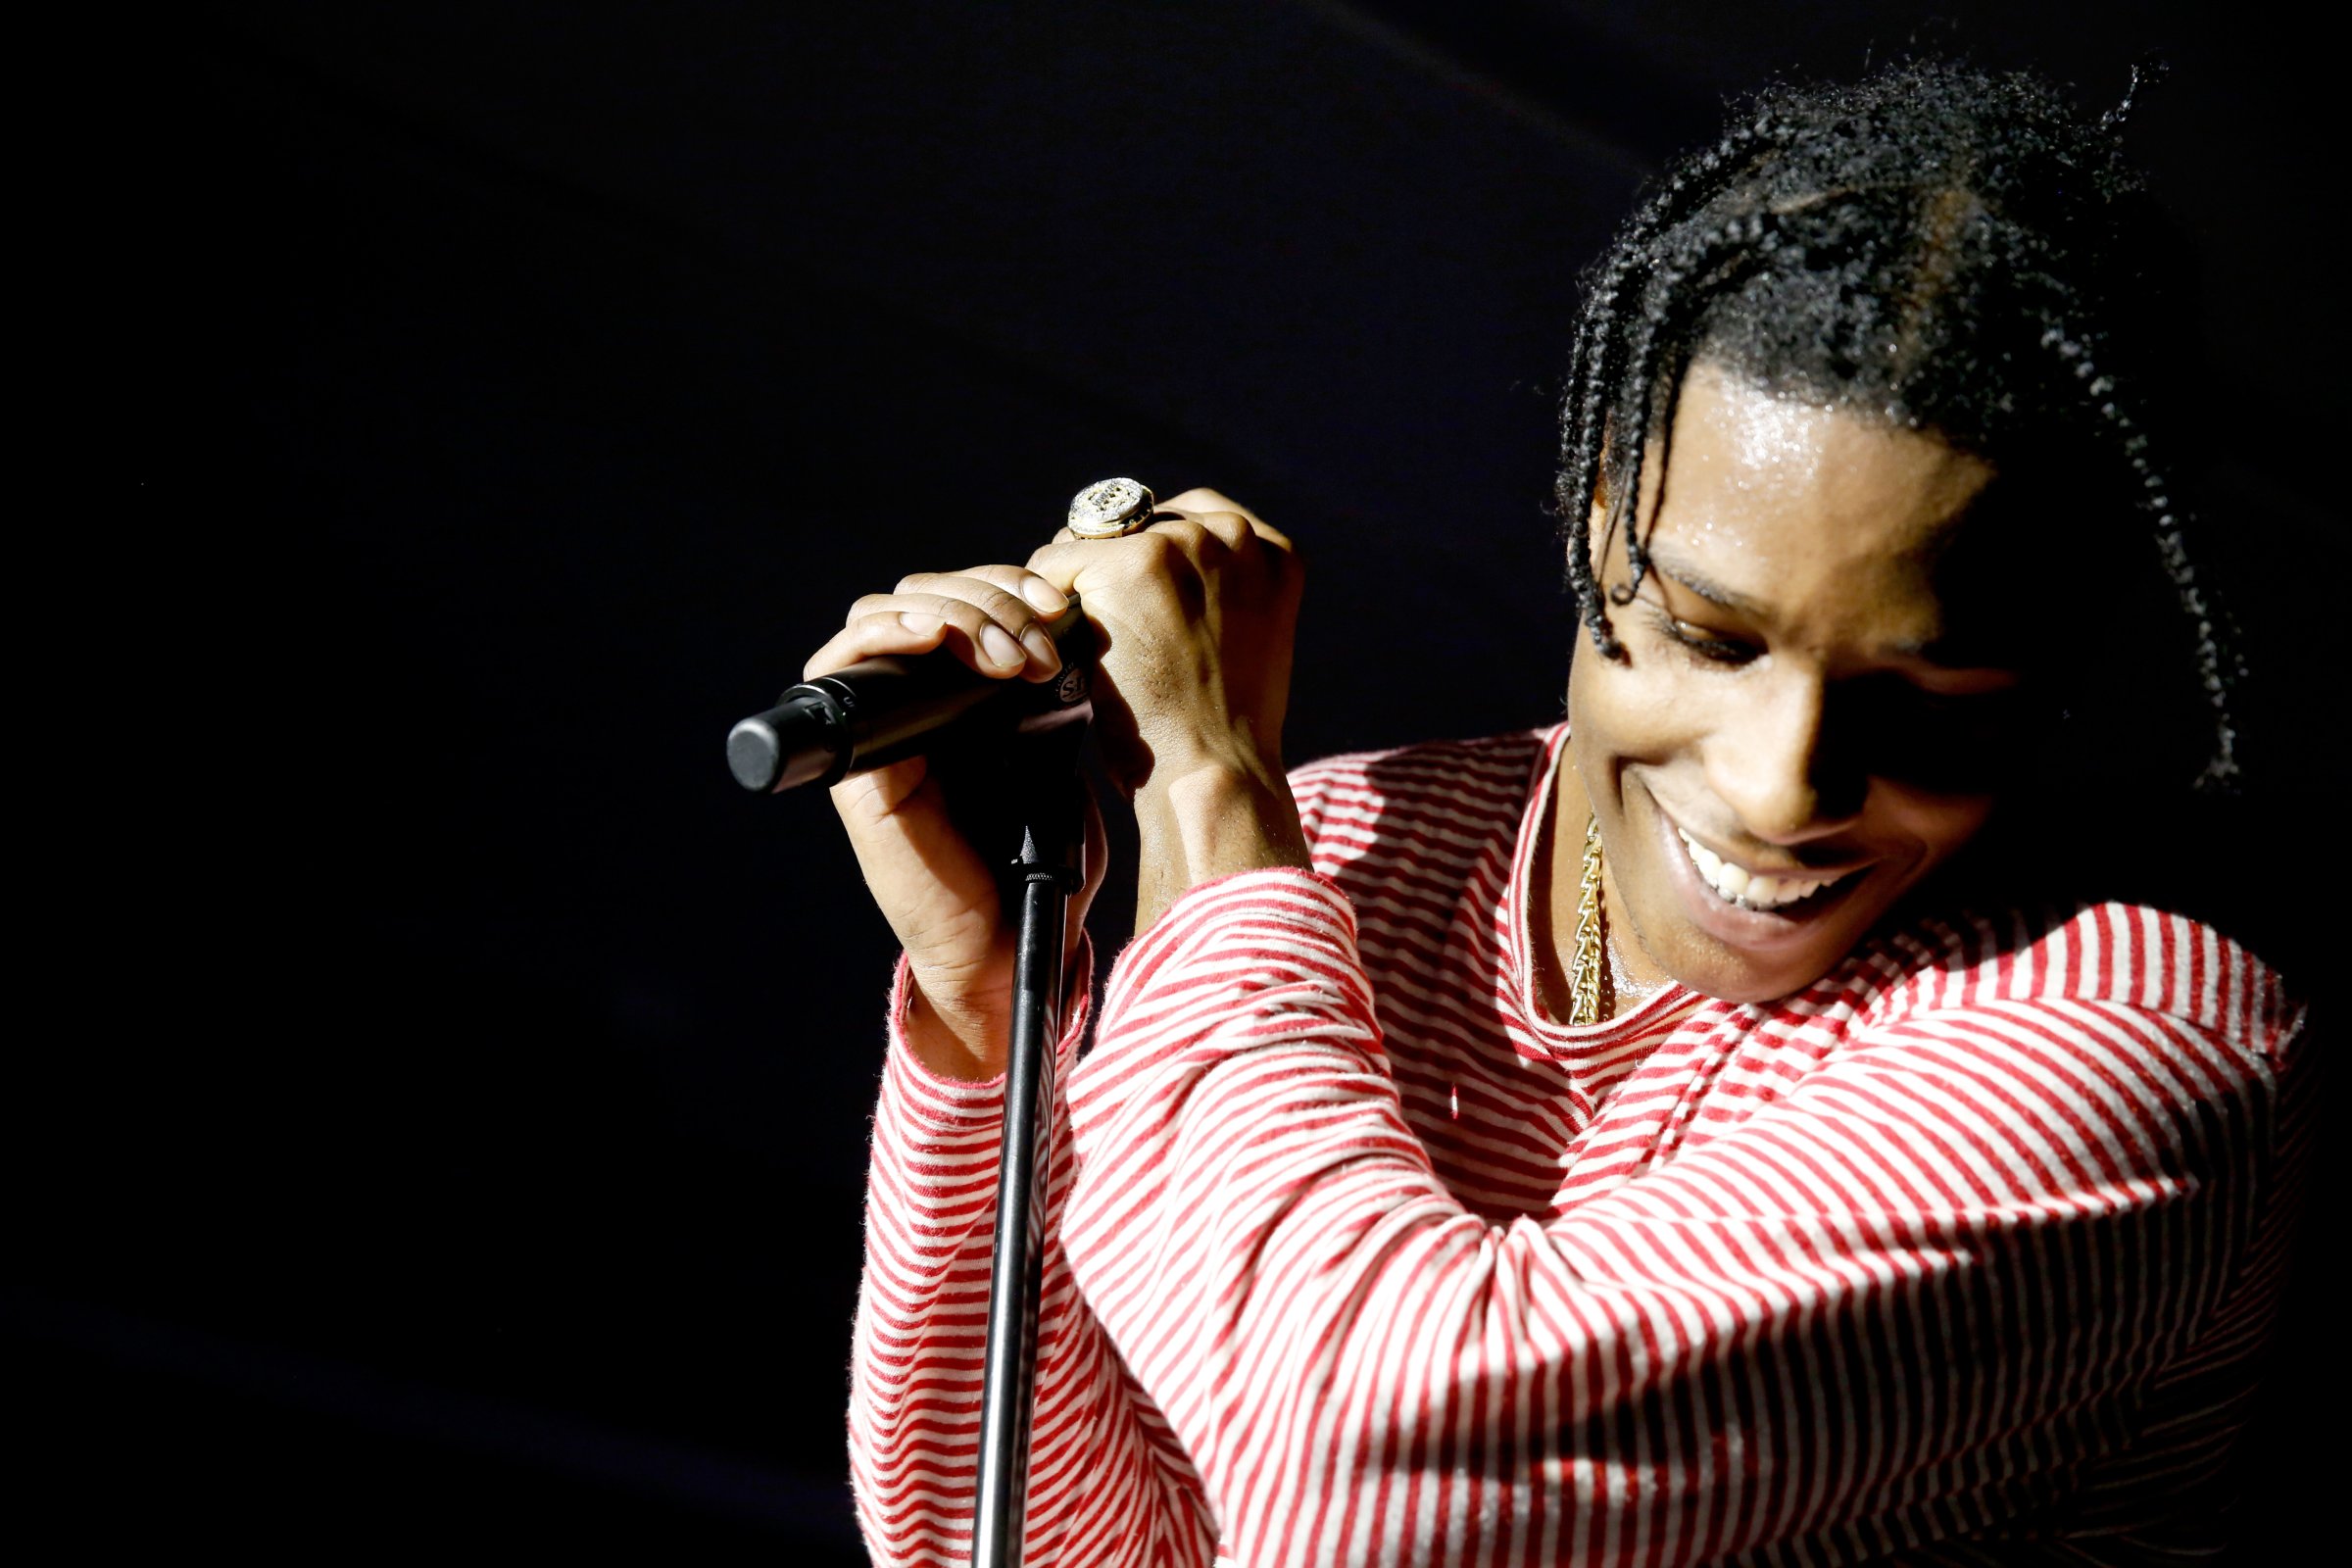 Rapper ASAP Rocky performs onstage at the Samsung Milk Music Lounge featuring A$AP Rocky on March 19, 2015 in Austin.